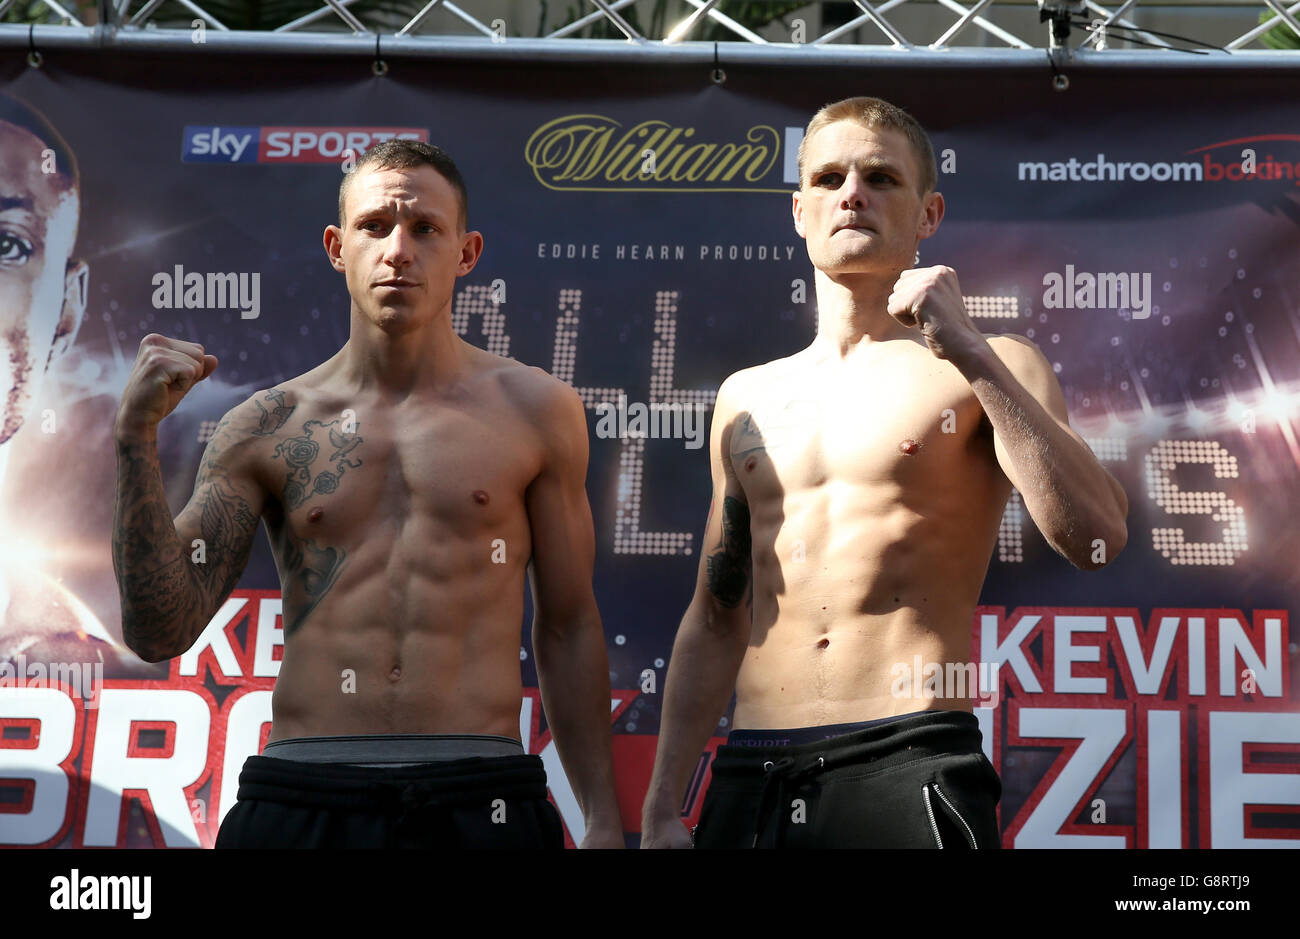 Kell Brook v Kevin Bizier Weigh-In - Winter Gardens. Craig Poxton (left) and Andy Townend during the Weigh-In at the Winter Gardens, Sheffield. Stock Photo